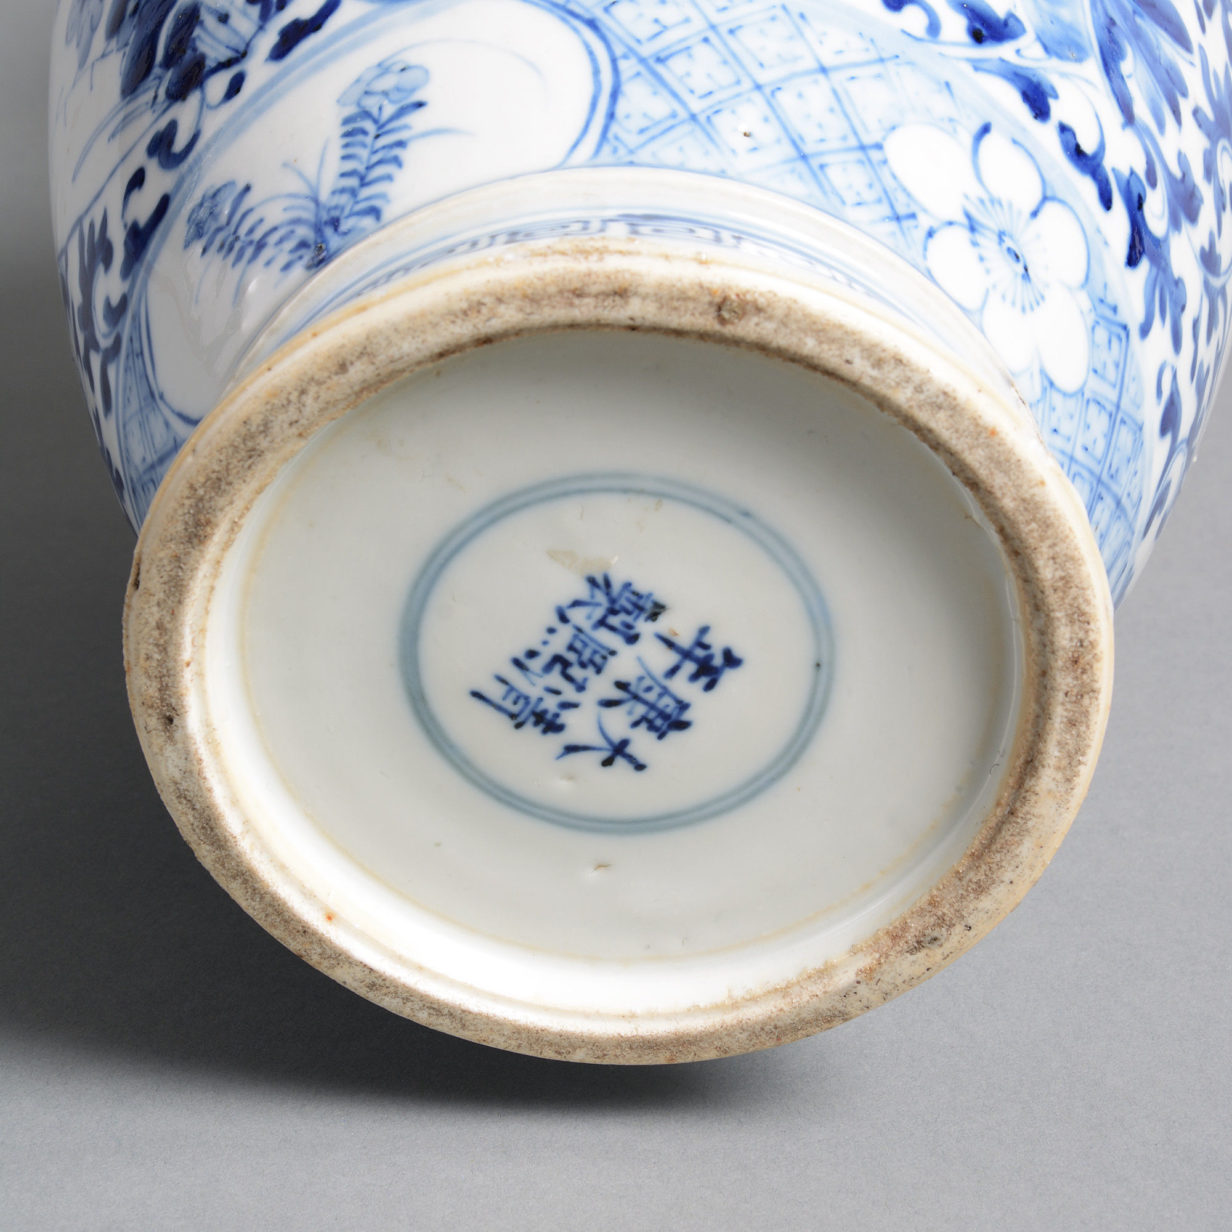 A 19th century qing dynasty blue and white porcelain vase